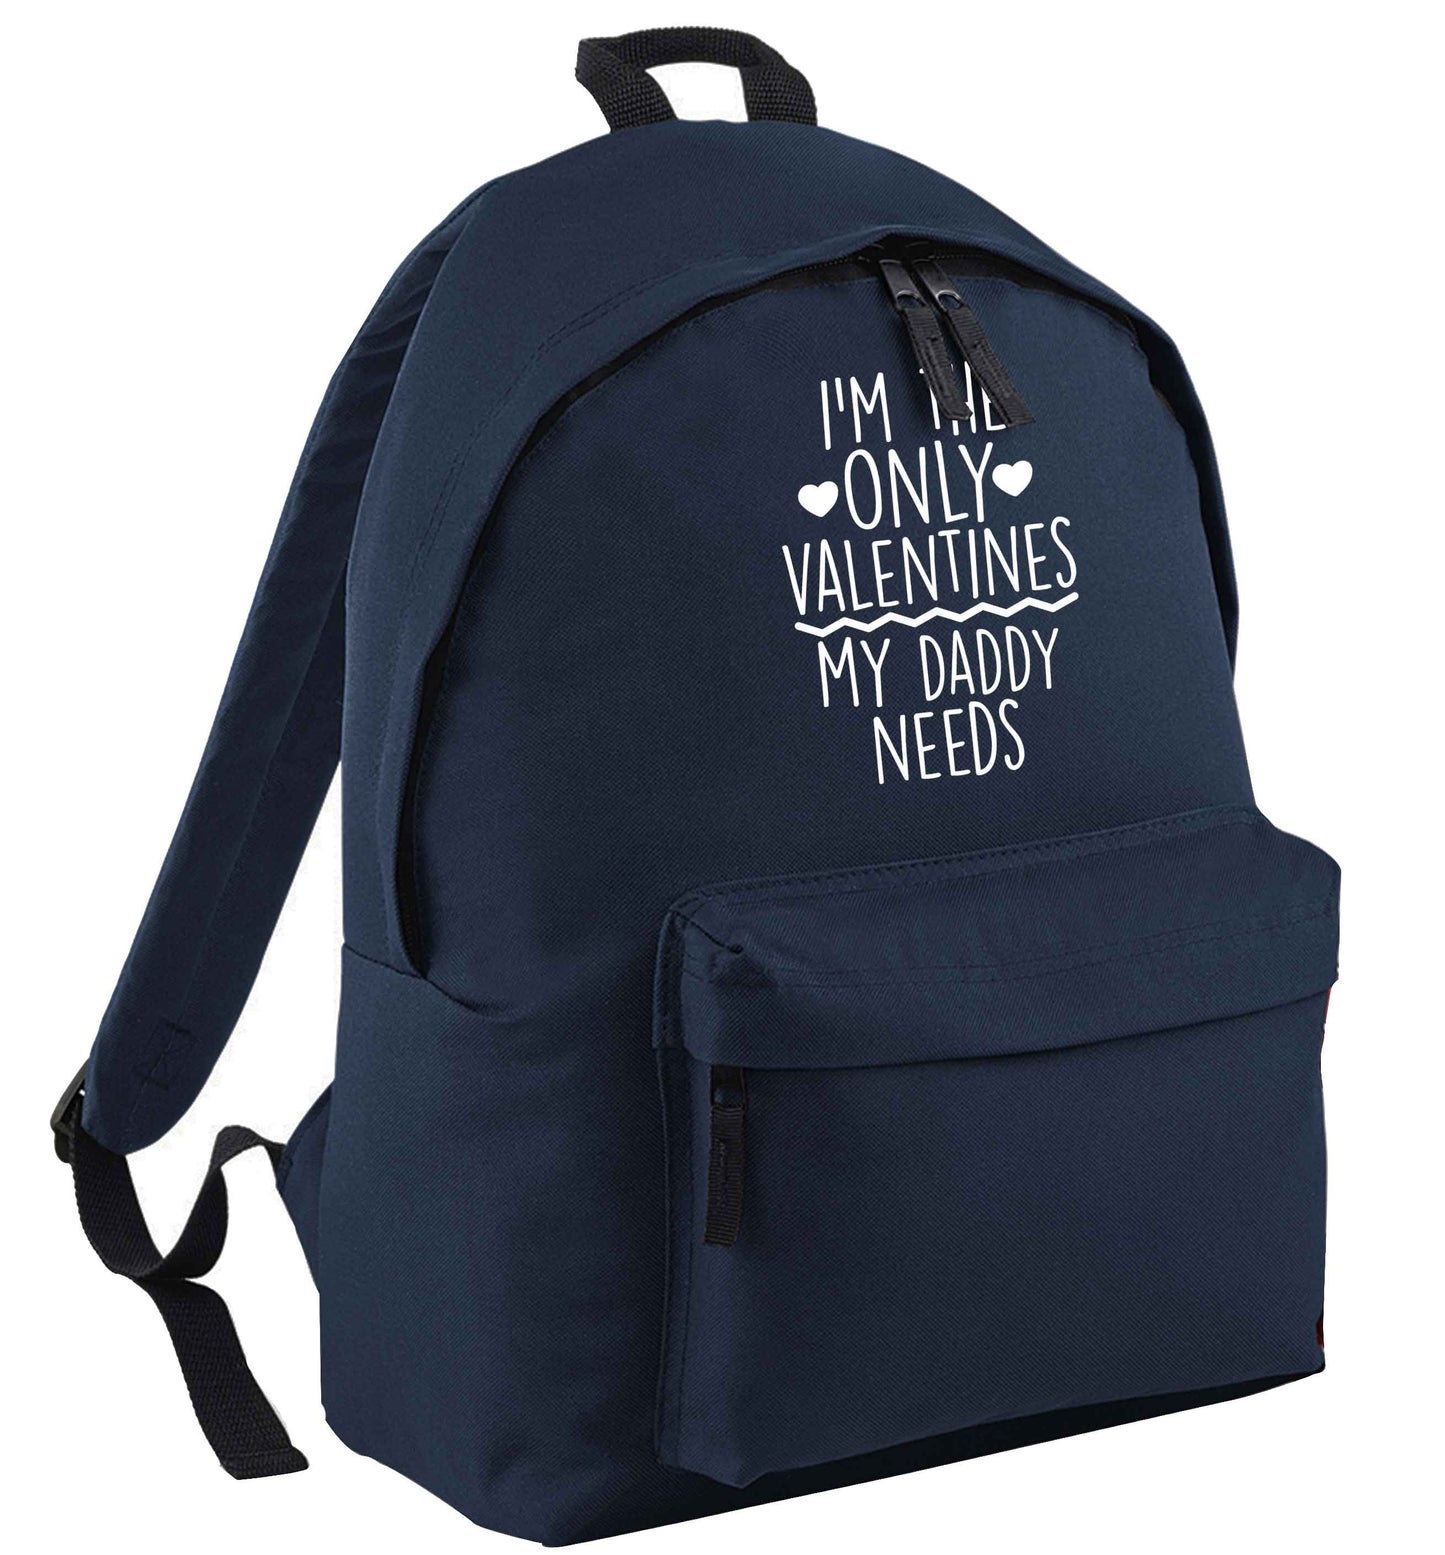 I'm the only valentines my daddy needs navy adults backpack